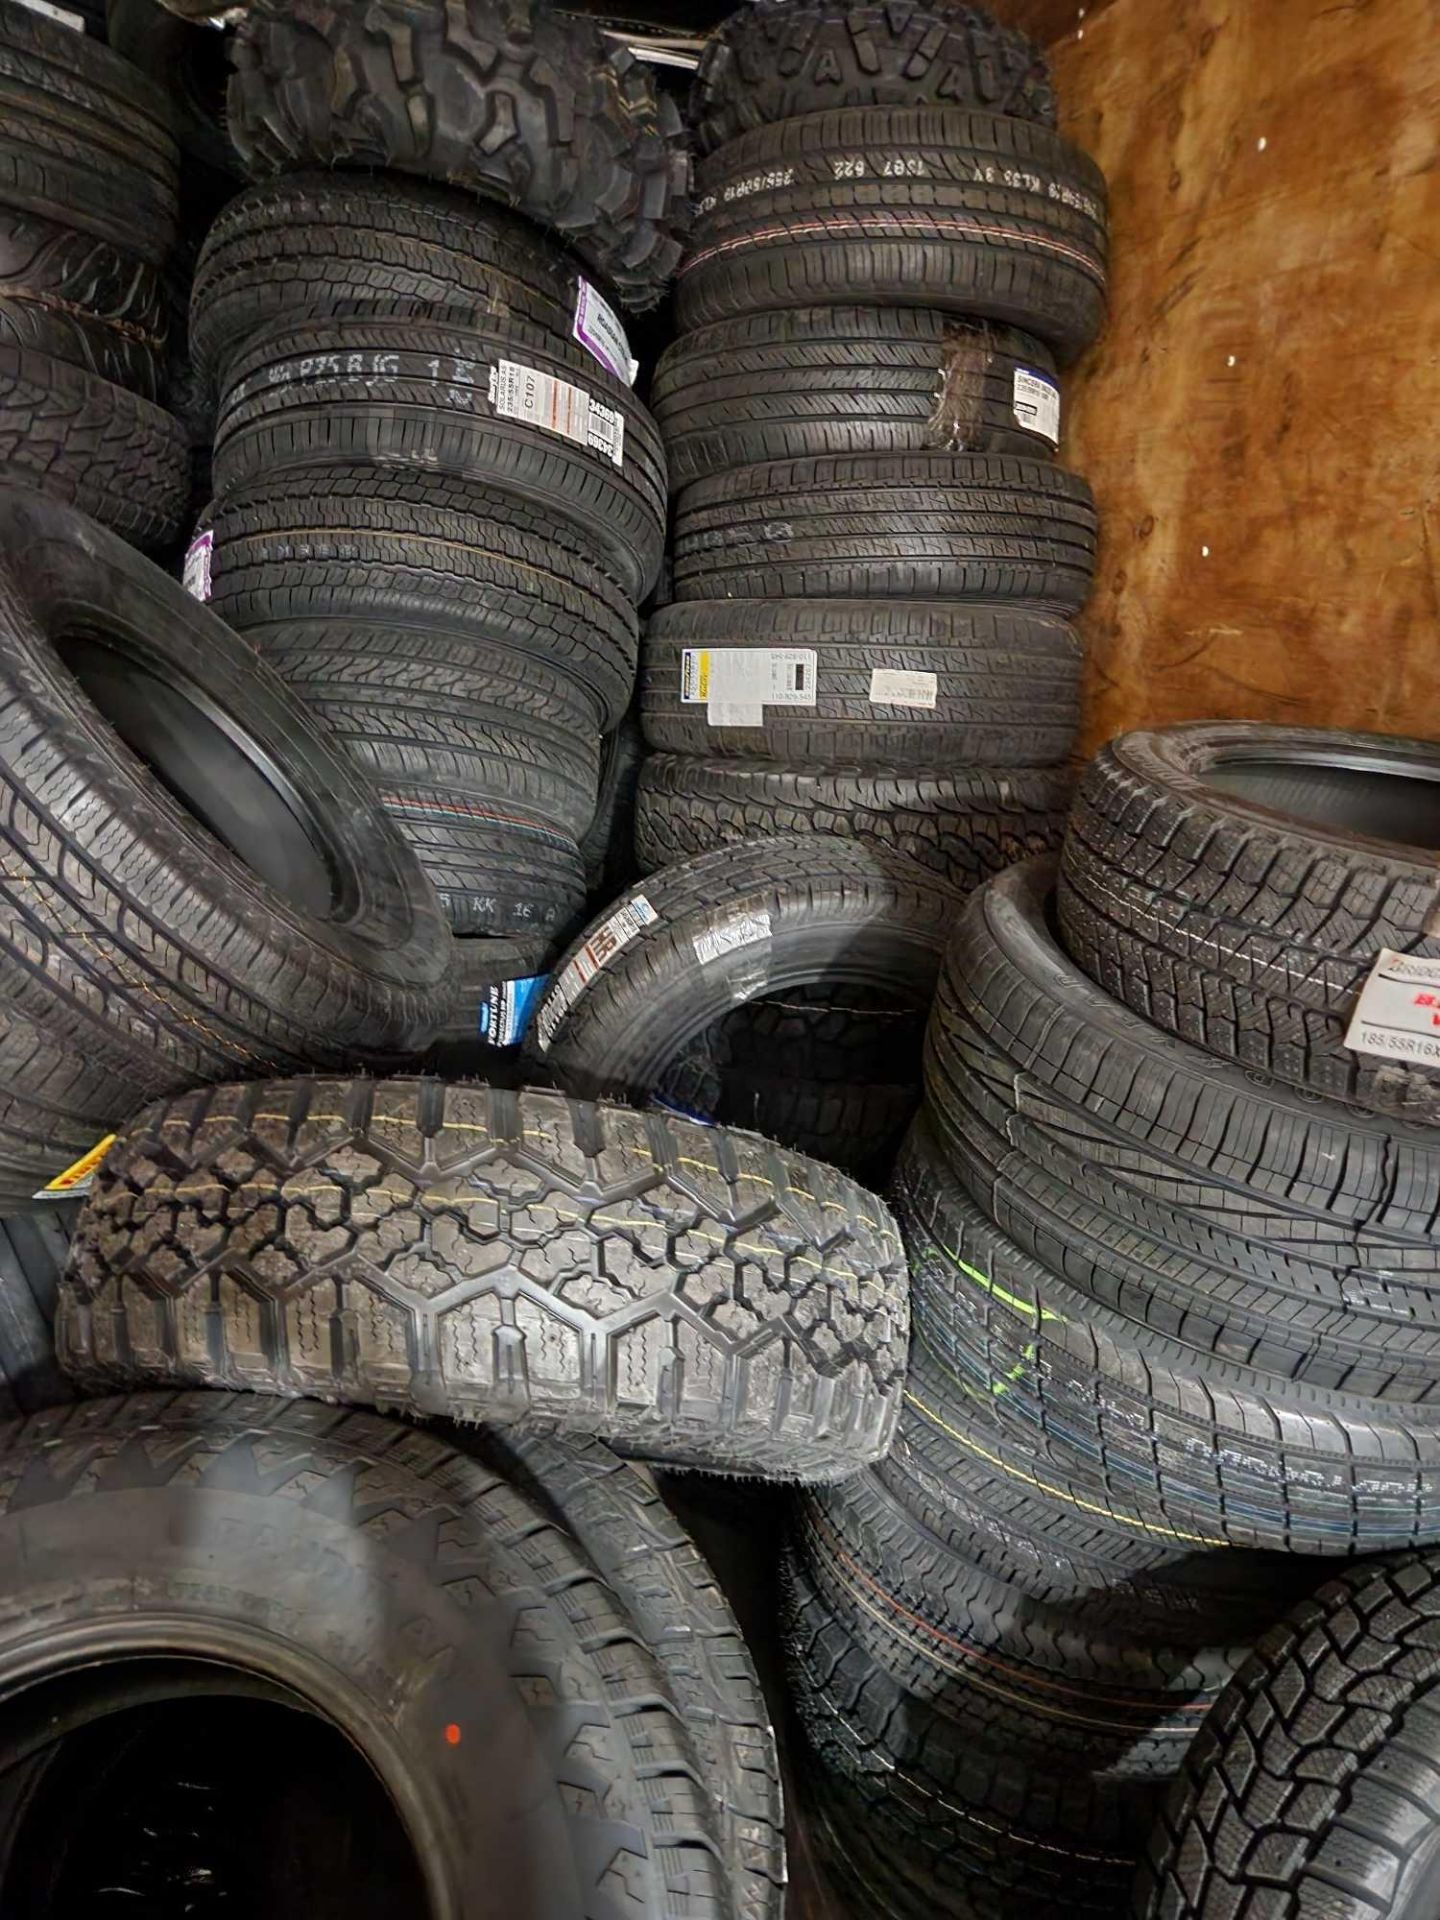 Semi Load of Tires - Image 9 of 11